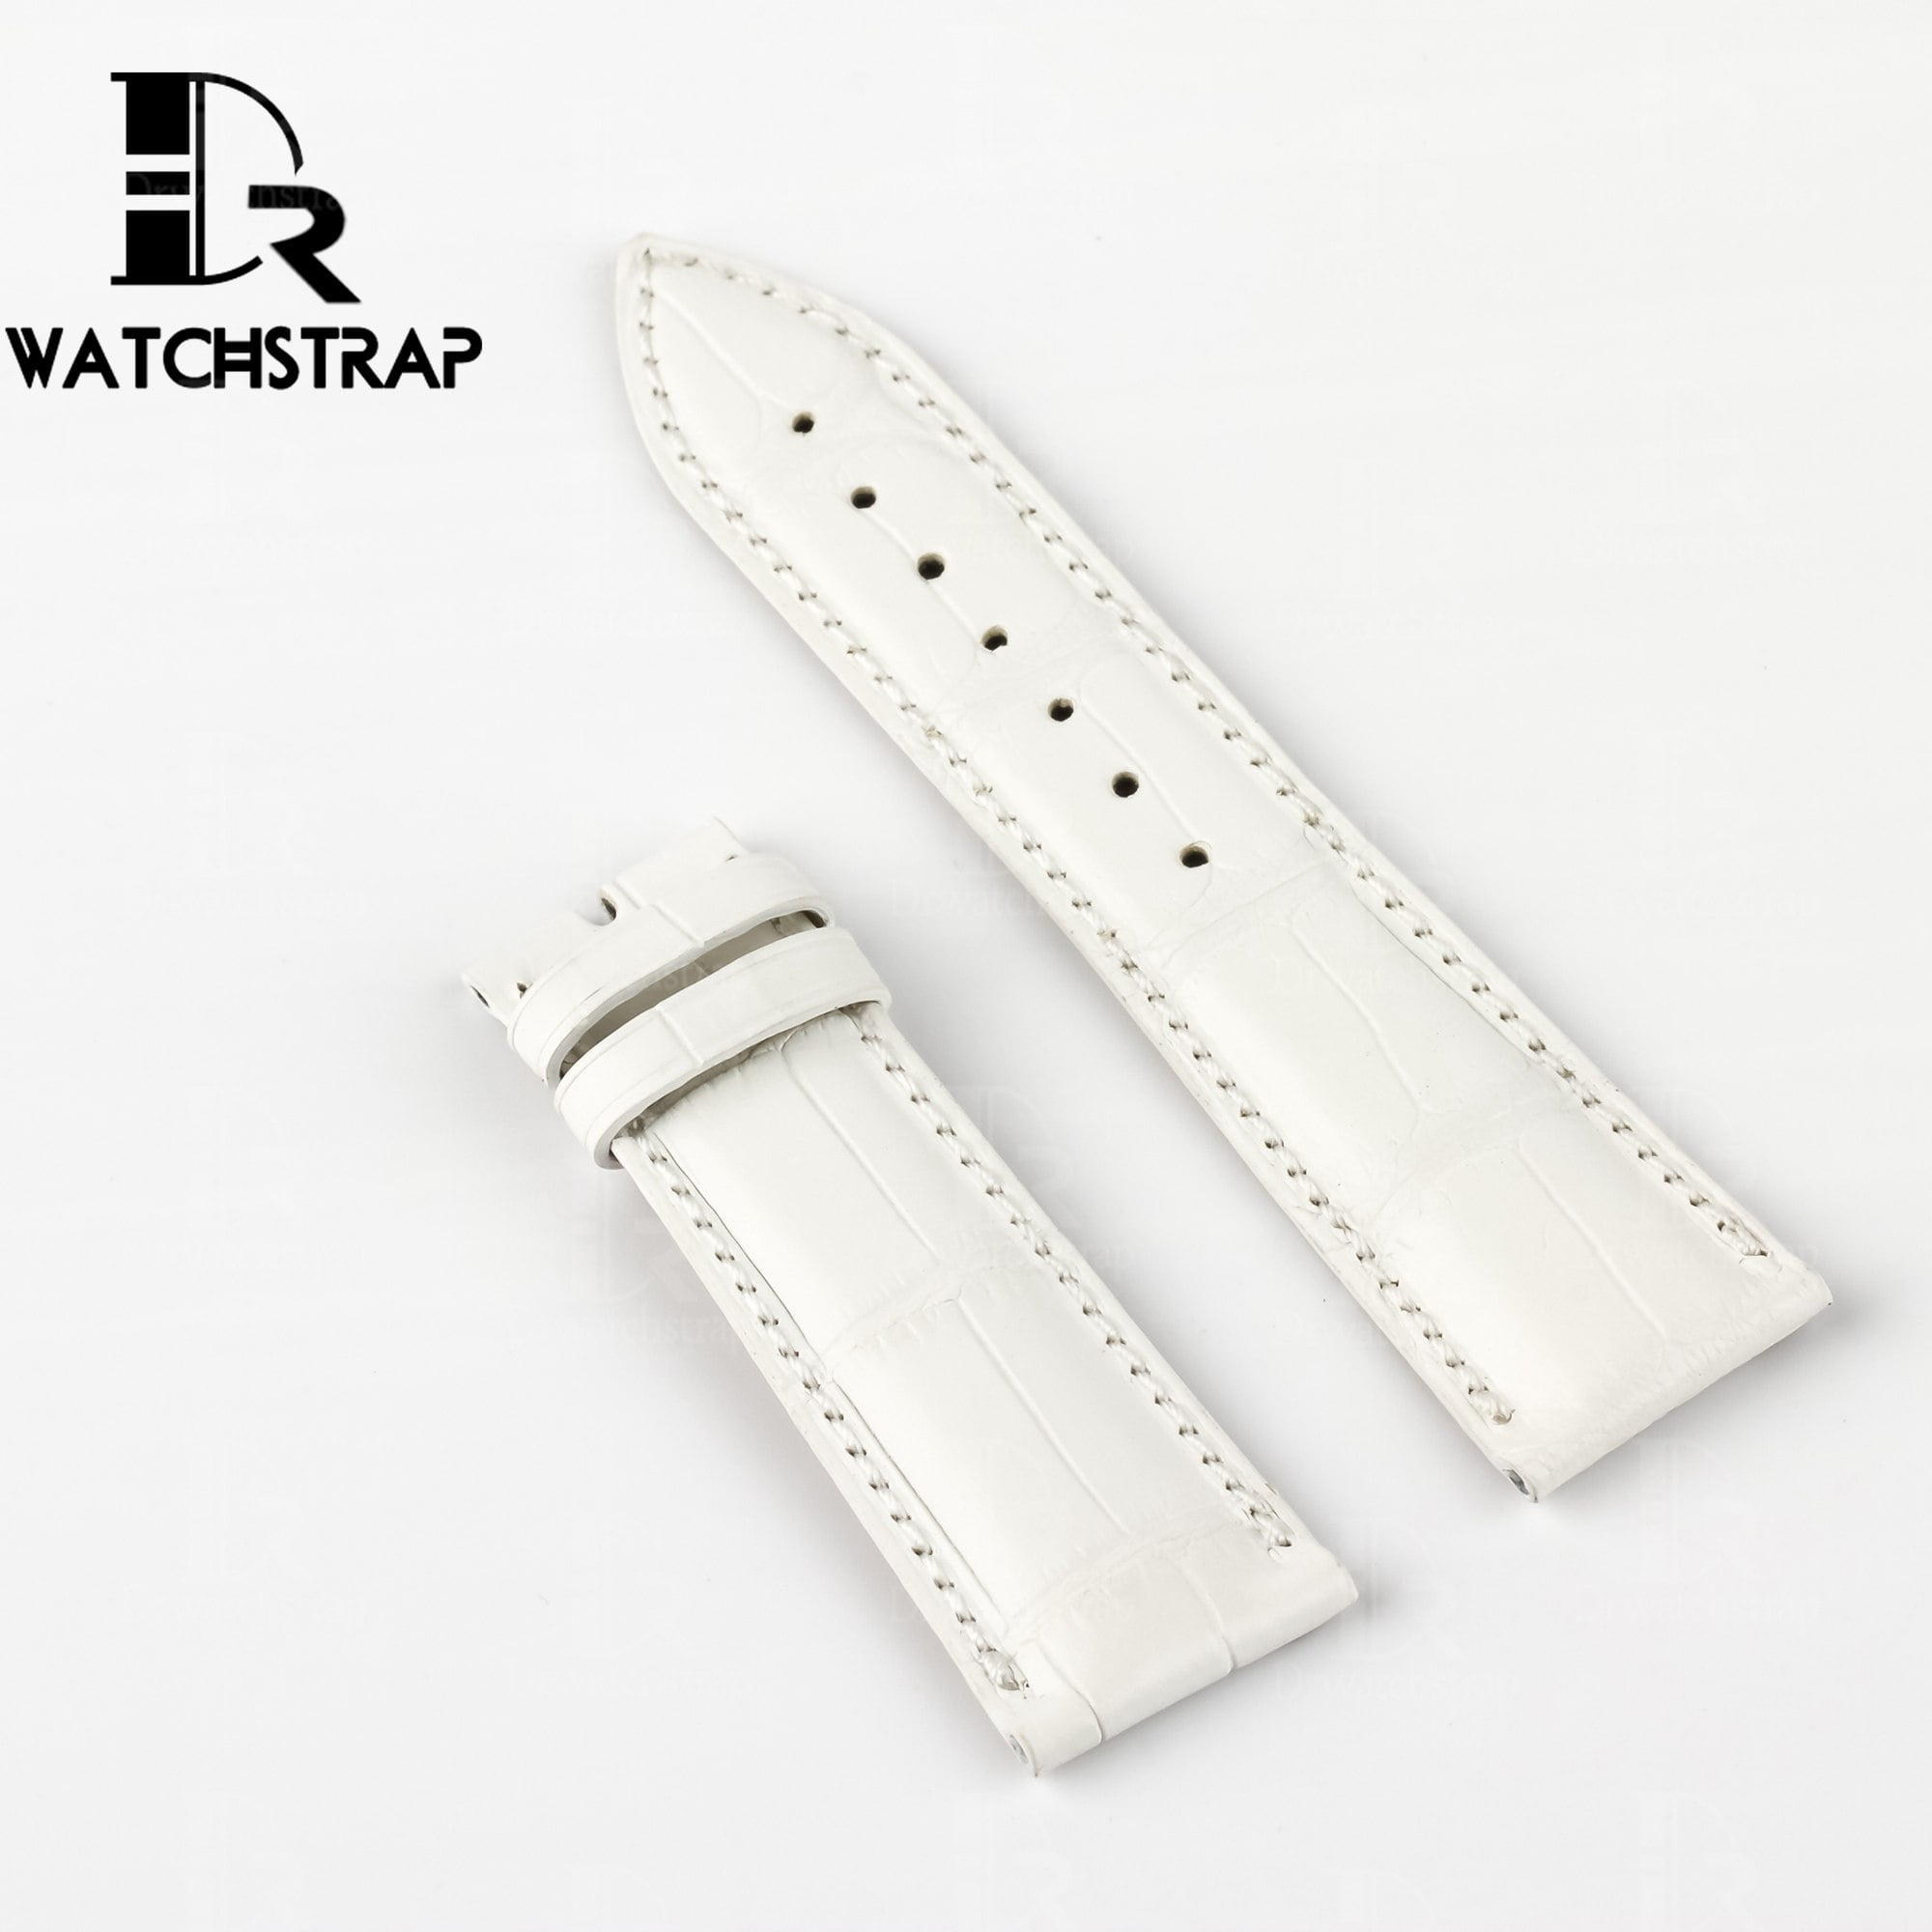 Best quality crocodile White America Alligator replacement Franck Muller leather strap and watch band for Franck Muller Casablanca 8880 luxury wristwatch - High-end watchbands online